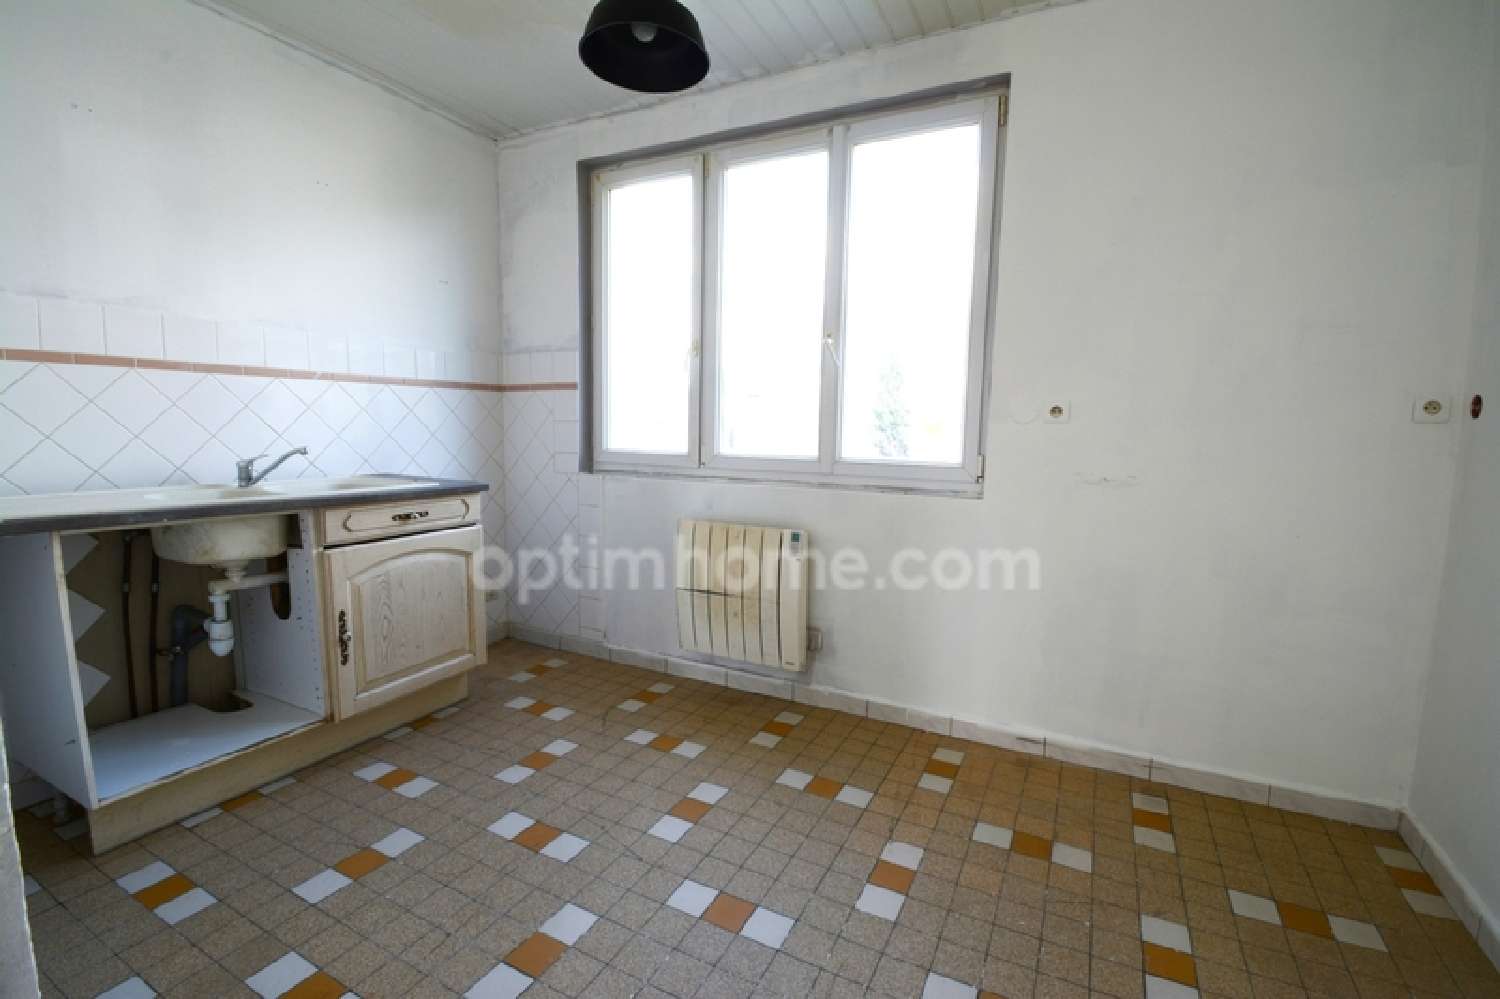  for sale house Nesle Somme 5